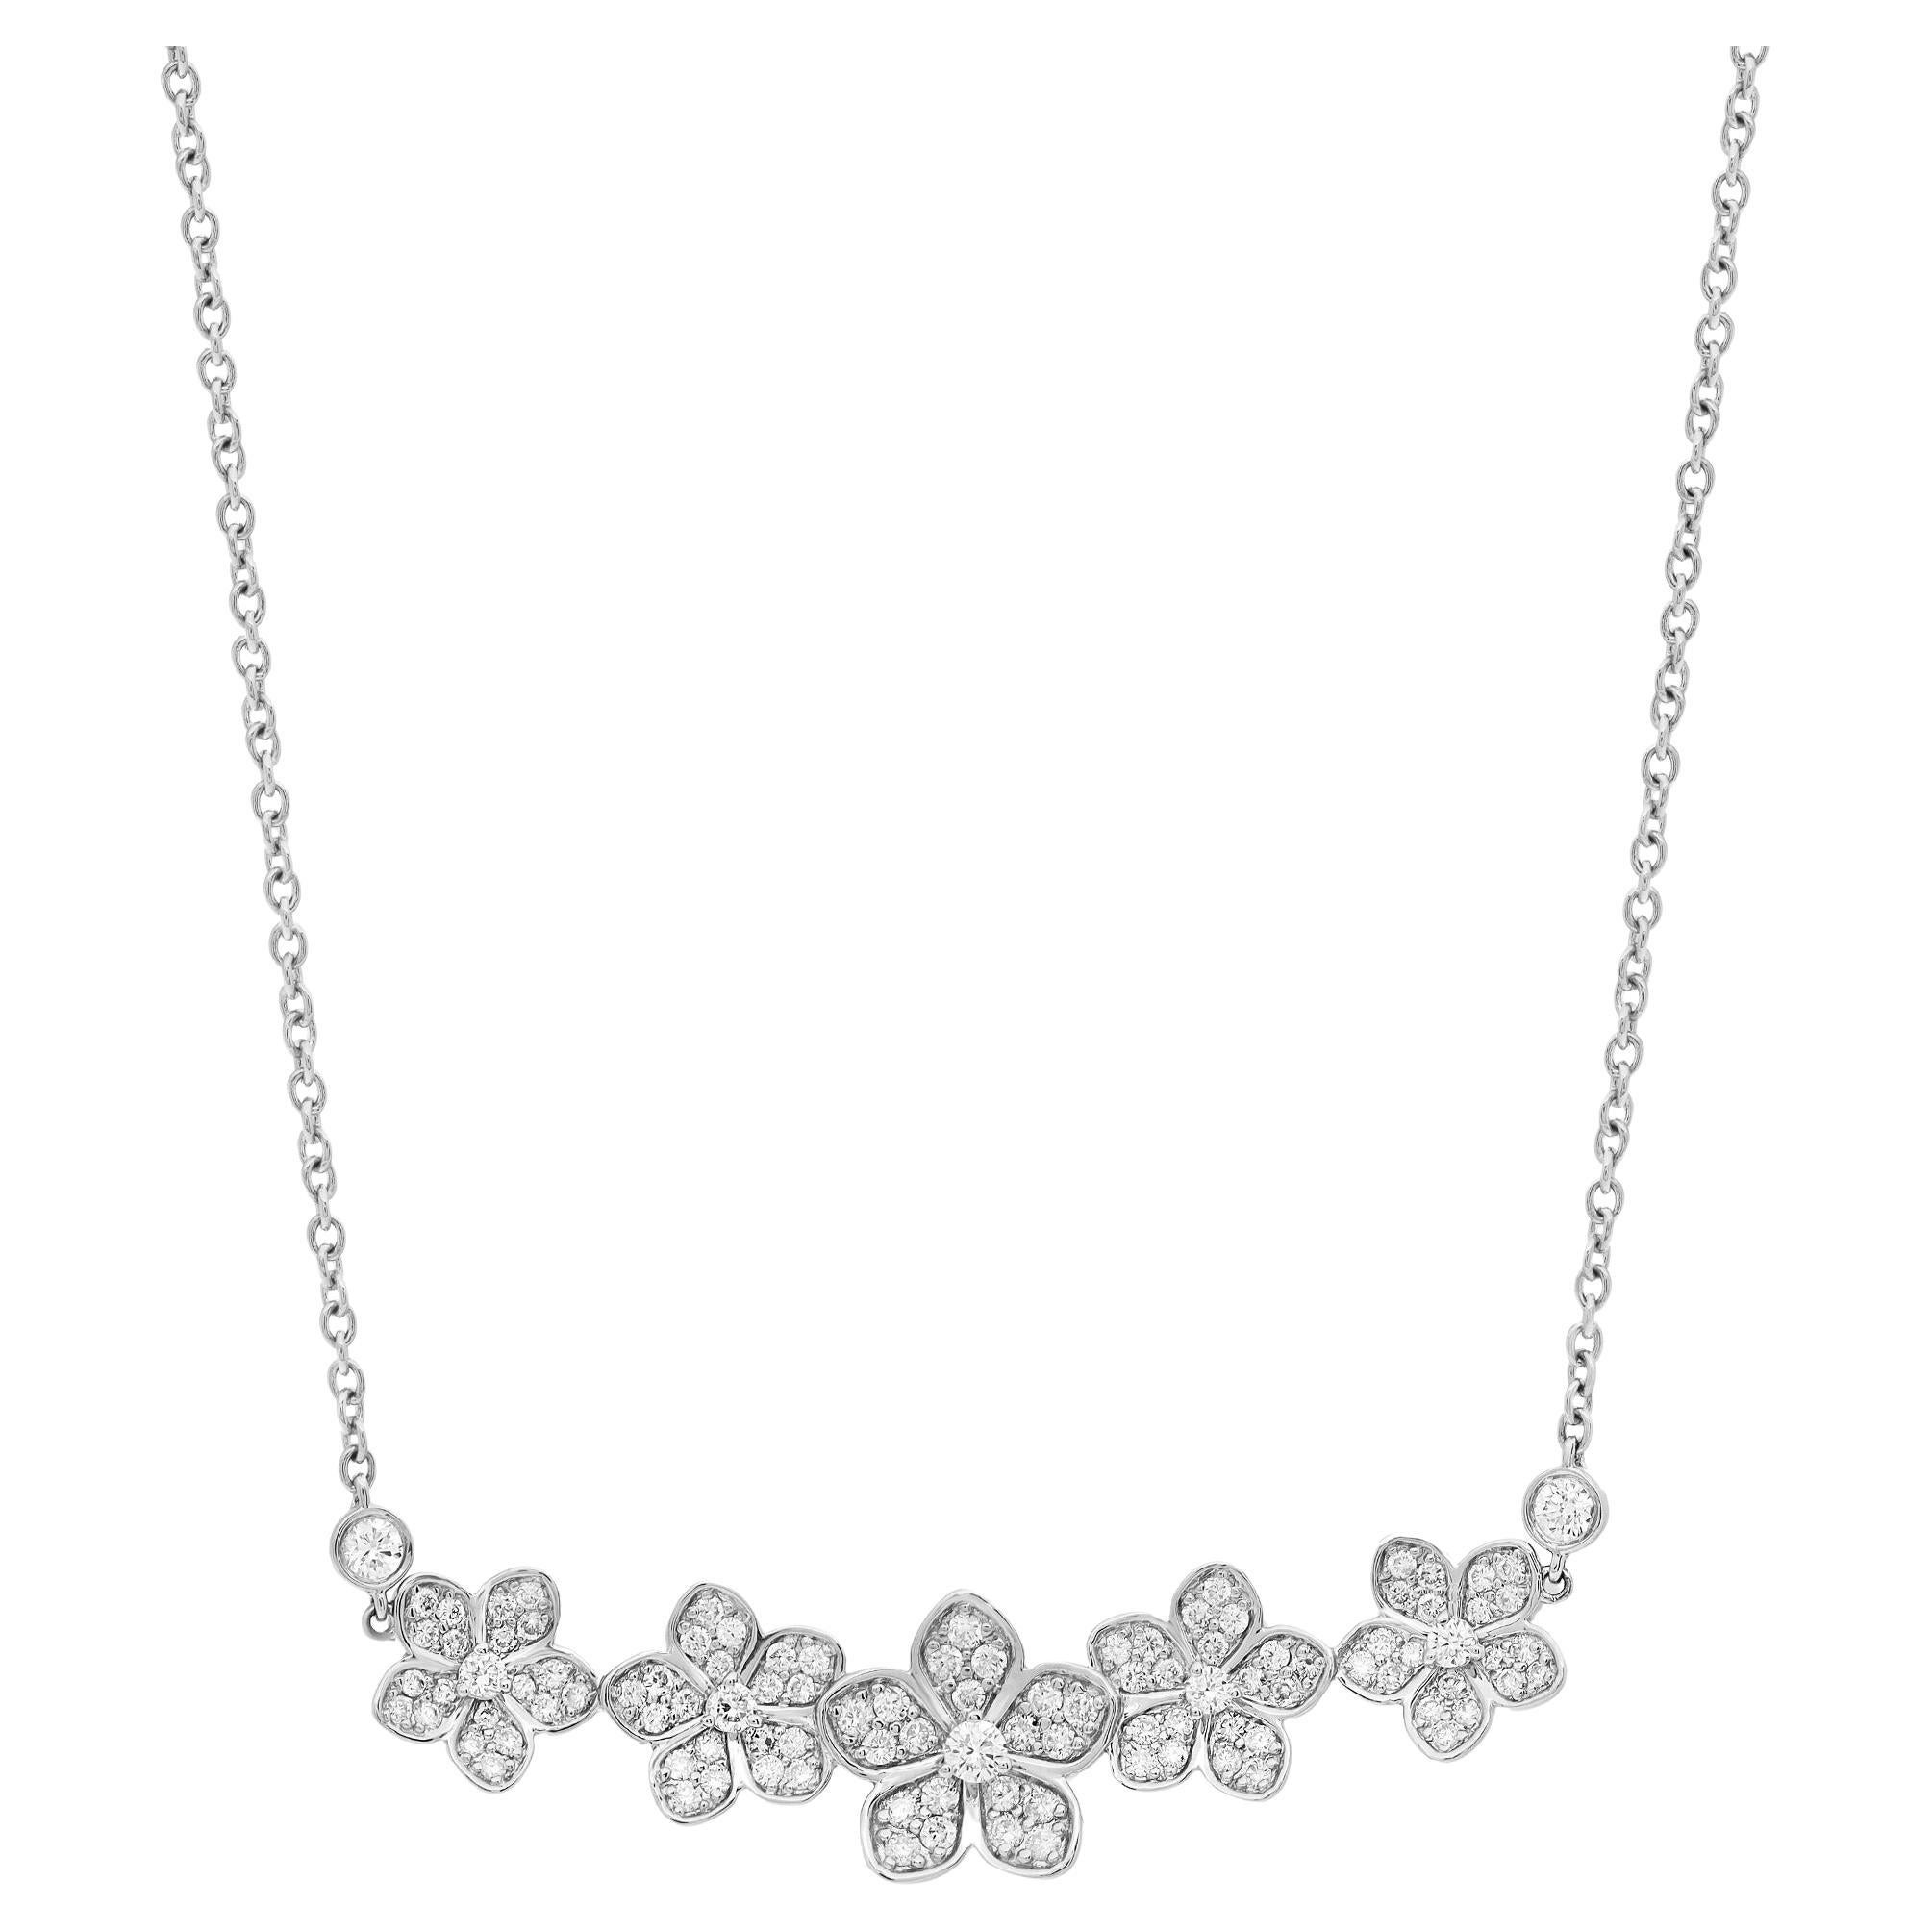 0.90Cttw Round Cut Diamond Floral Bar Necklace 18K White Gold 18 Inches